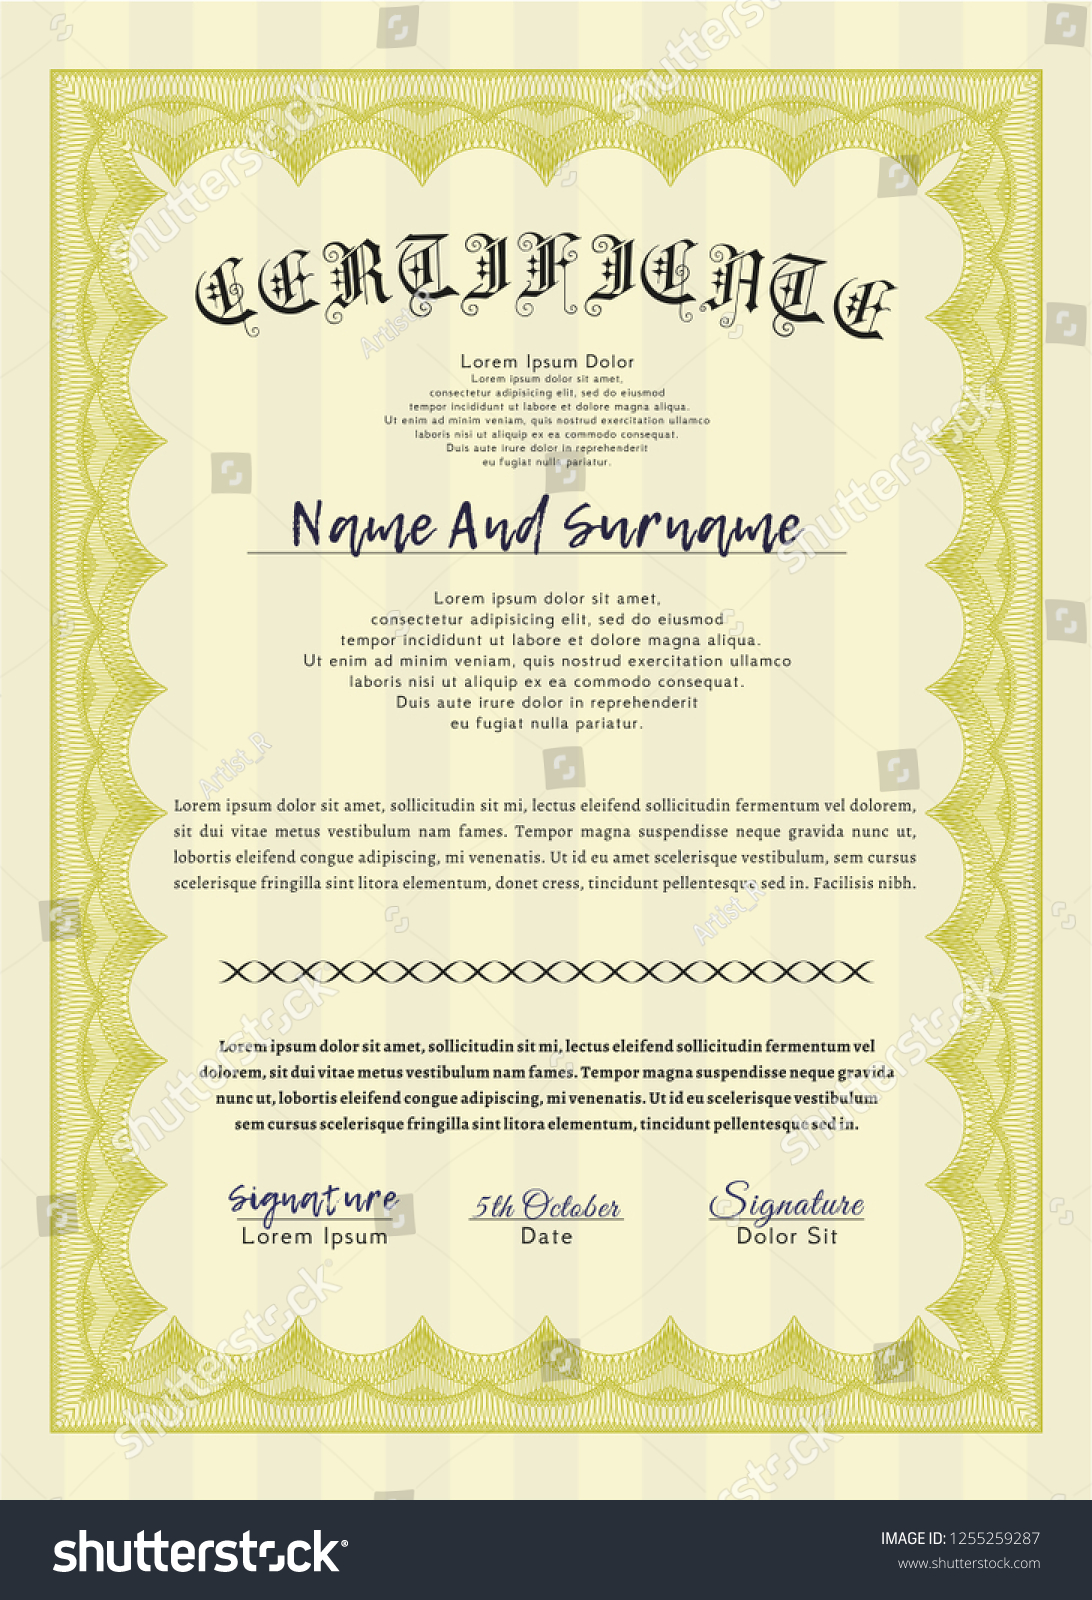 Yellow Certificate or diploma template. With - Royalty Free Stock ...